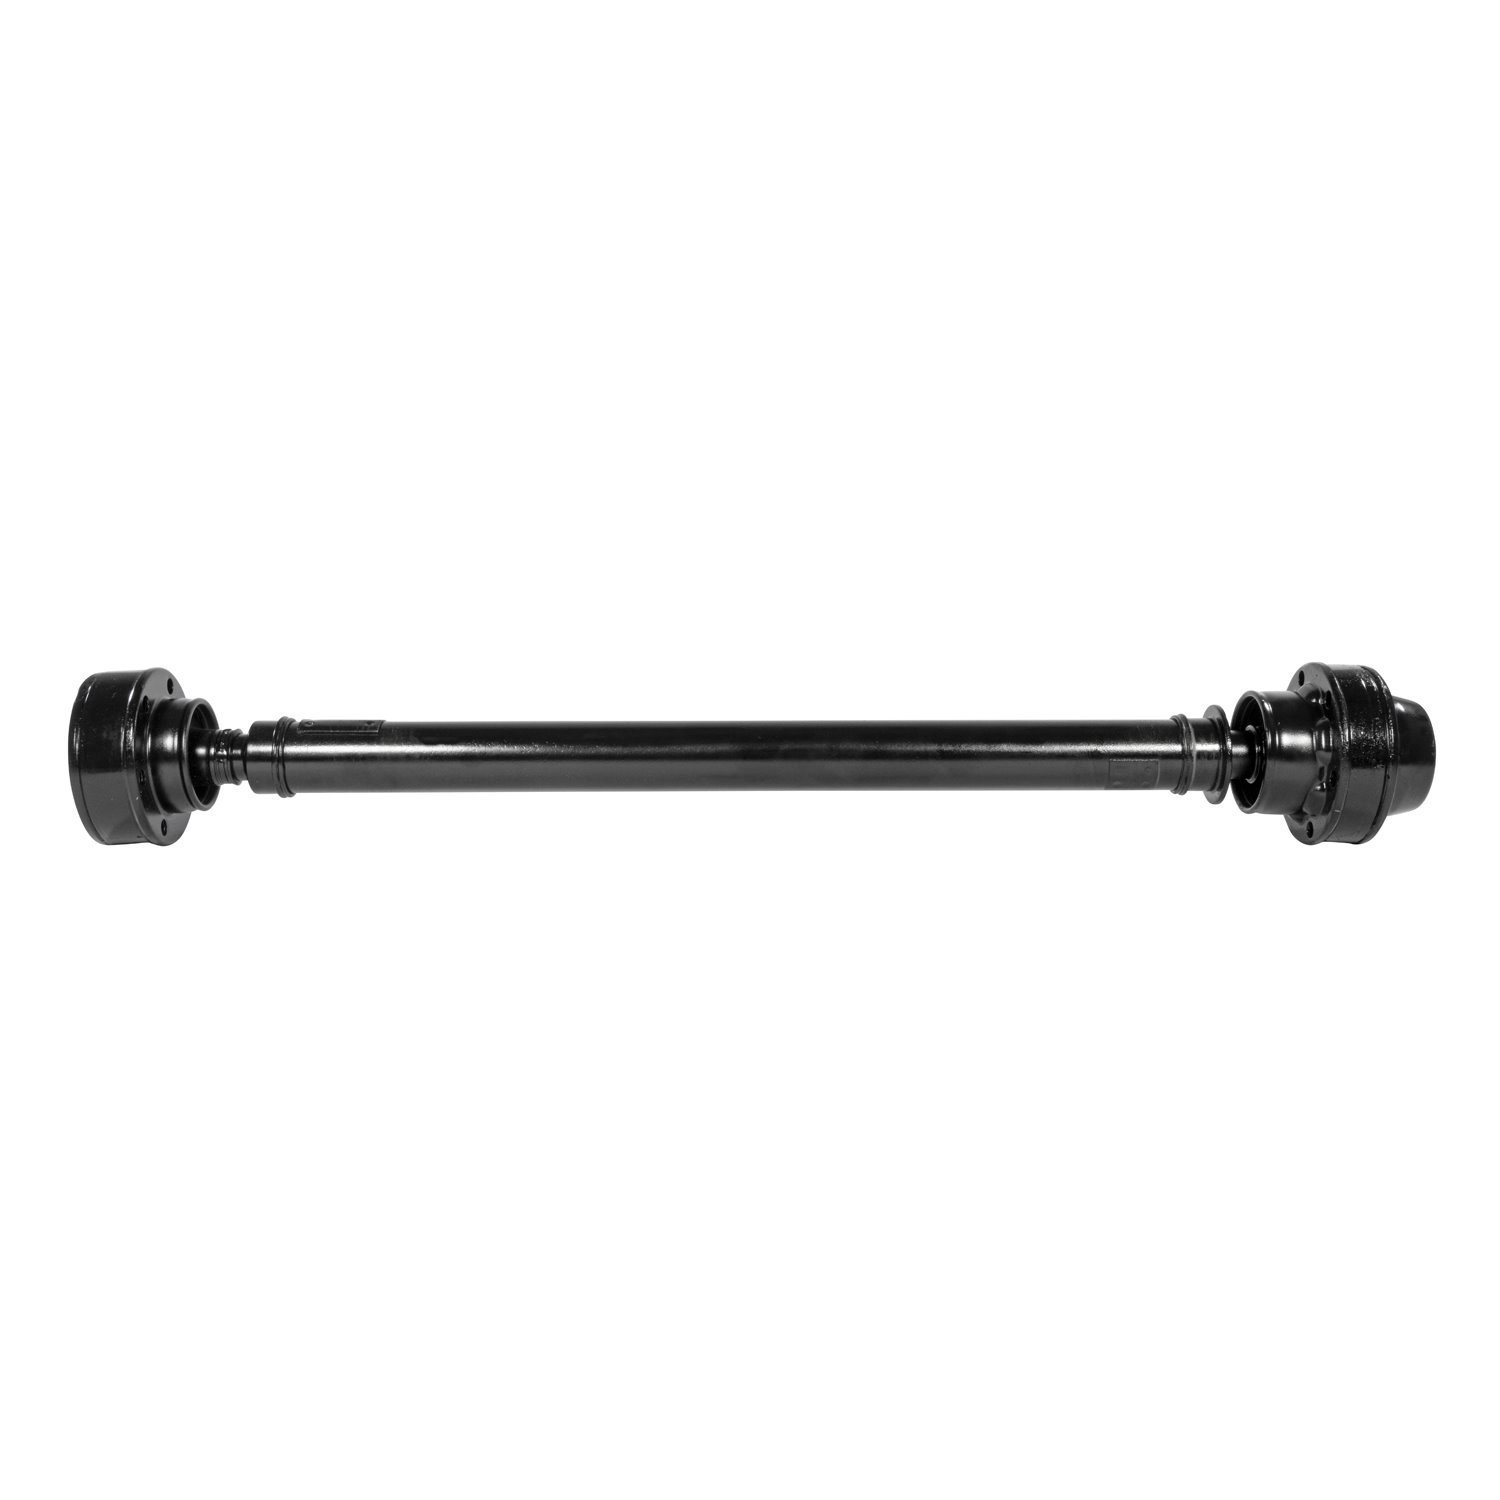 USA Standard 44623 Front Driveshaft, For Ford, Lincoln, Mercury Truck & Suv, 22.25 in. Weld-To-Weld